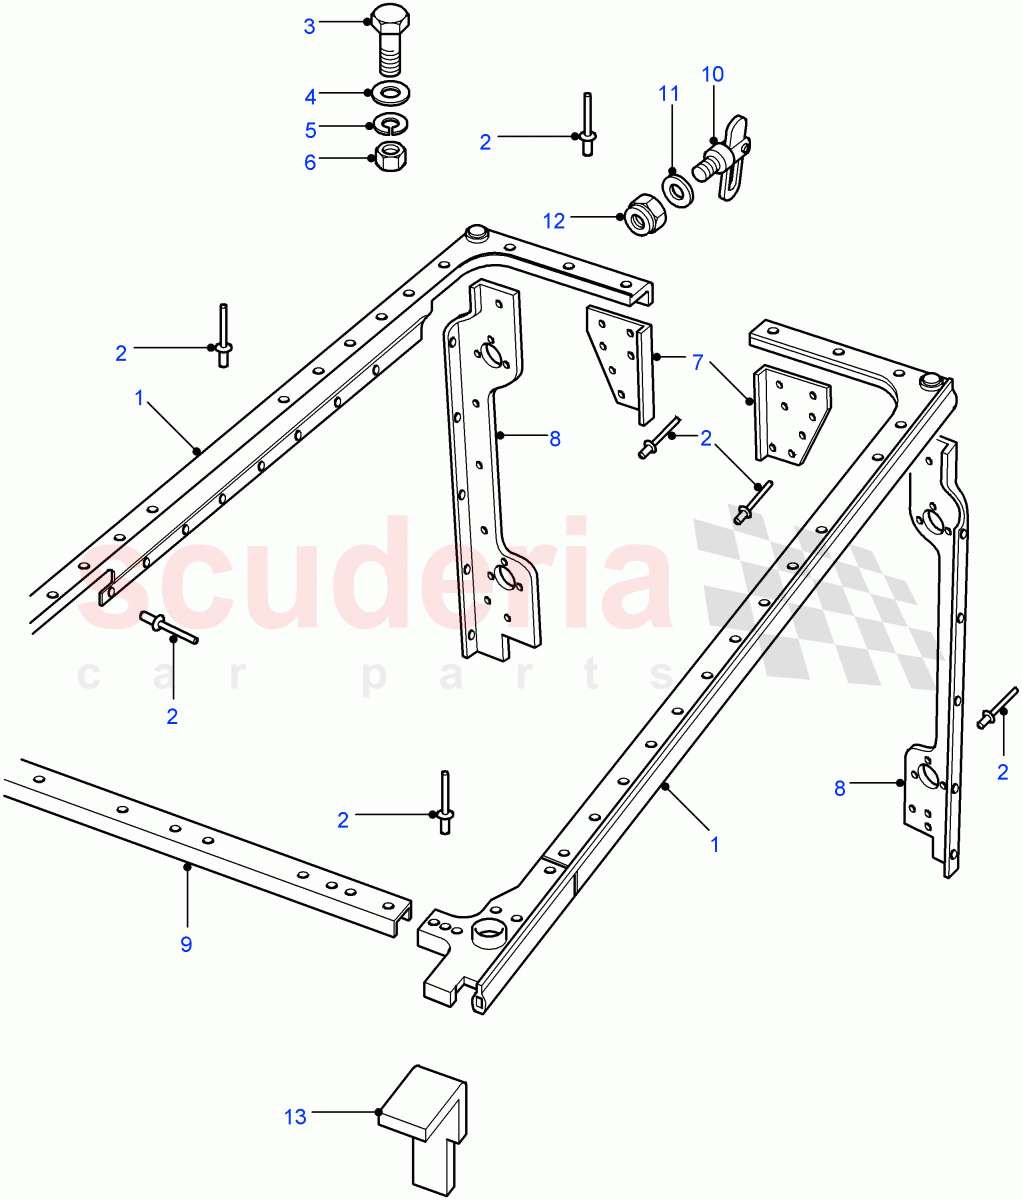 Cappings - Rear Body((V)FROM7A000001) of Land Rover Land Rover Defender (2007-2016)